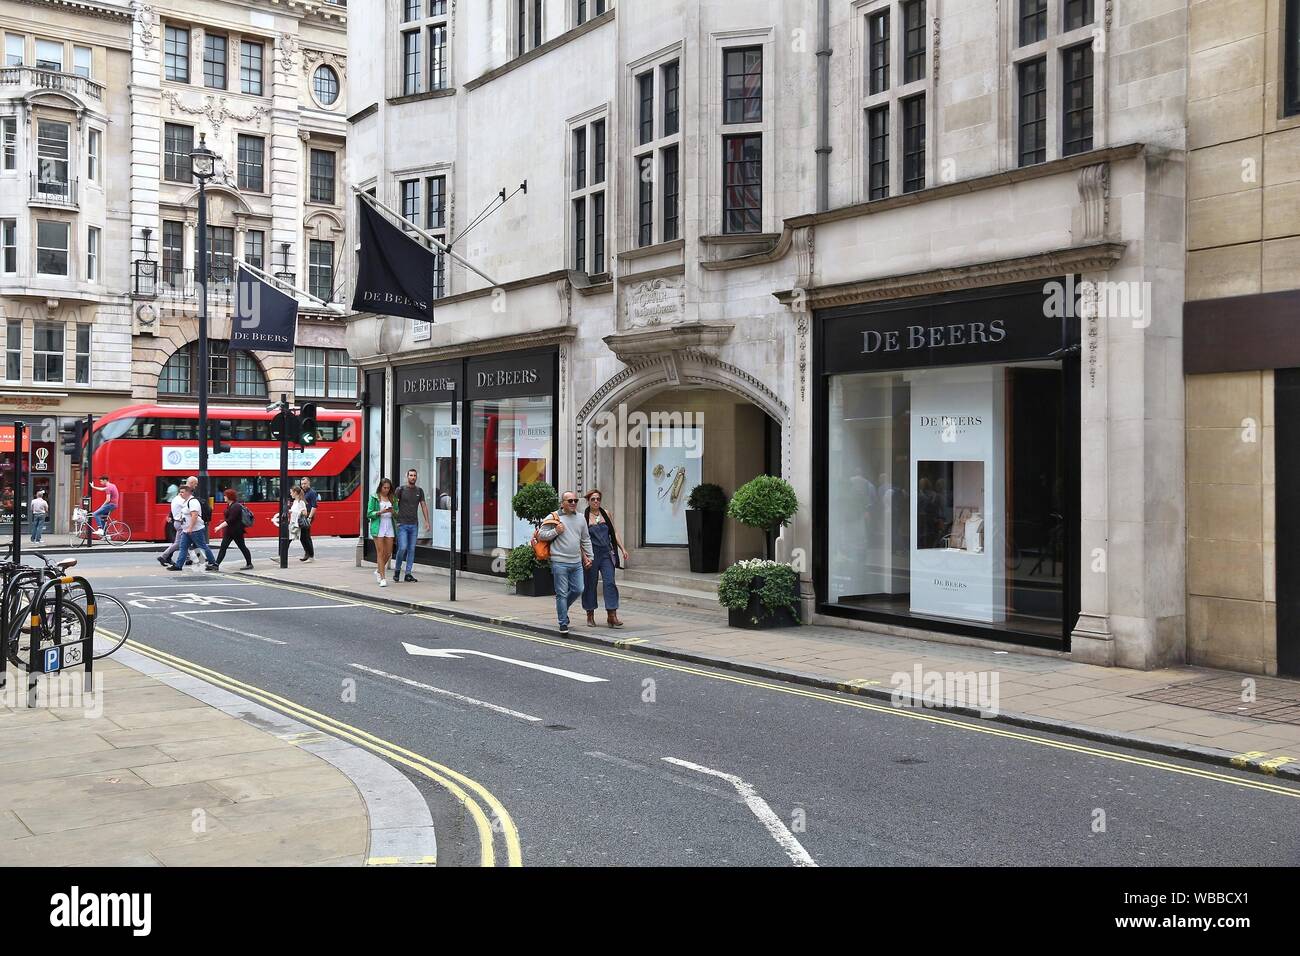 LONDON, UK - JULY 9, 2016: Shoppers visit fashion shops at Old Bond Street in London. Bond Street is a major shopping street in the West End of London Stock Photo